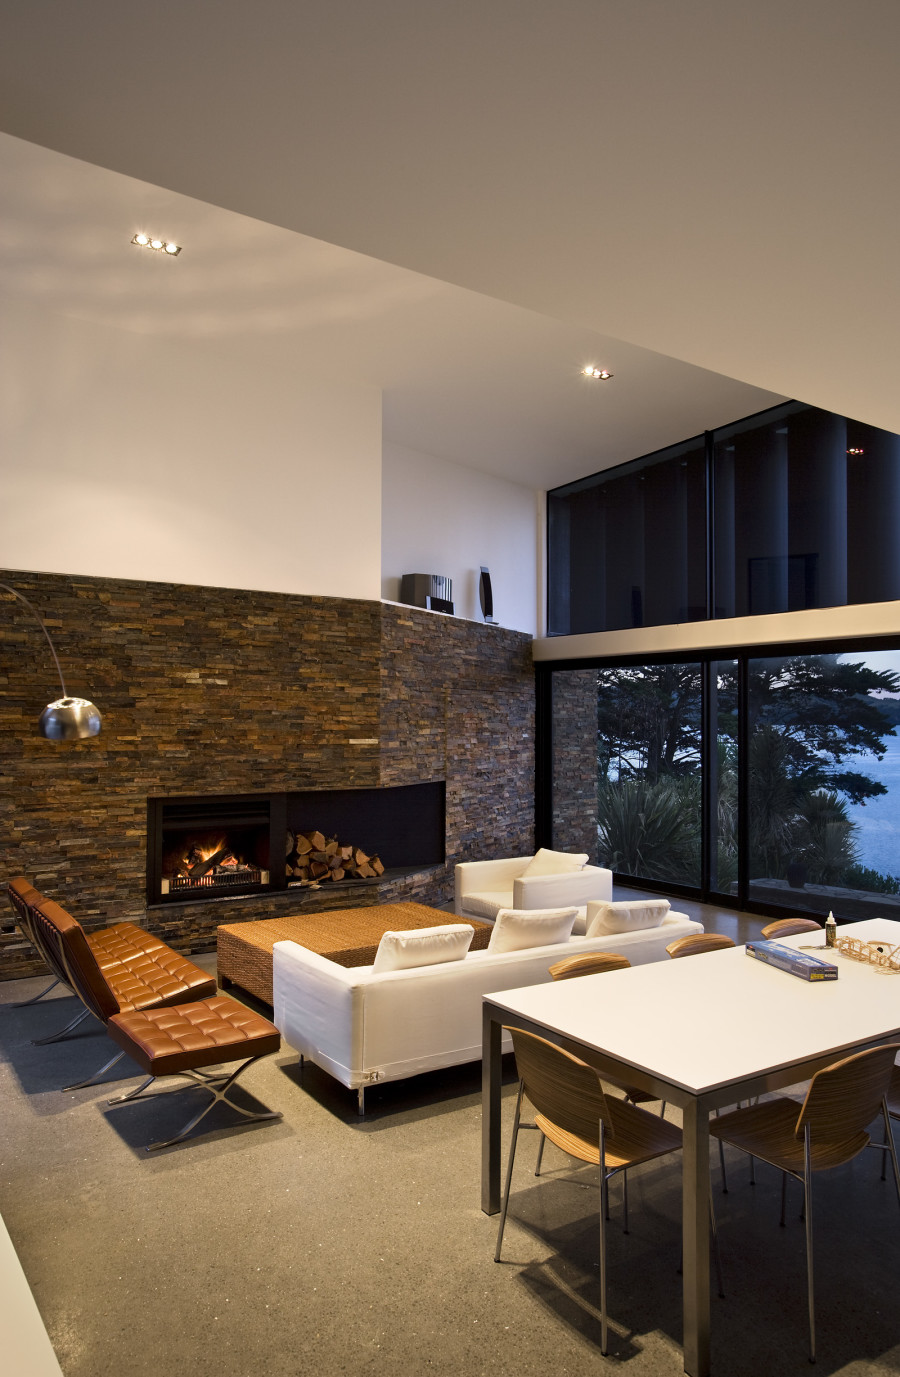 Contemporary beach house in New Zealand by Daniel Marshall Architects